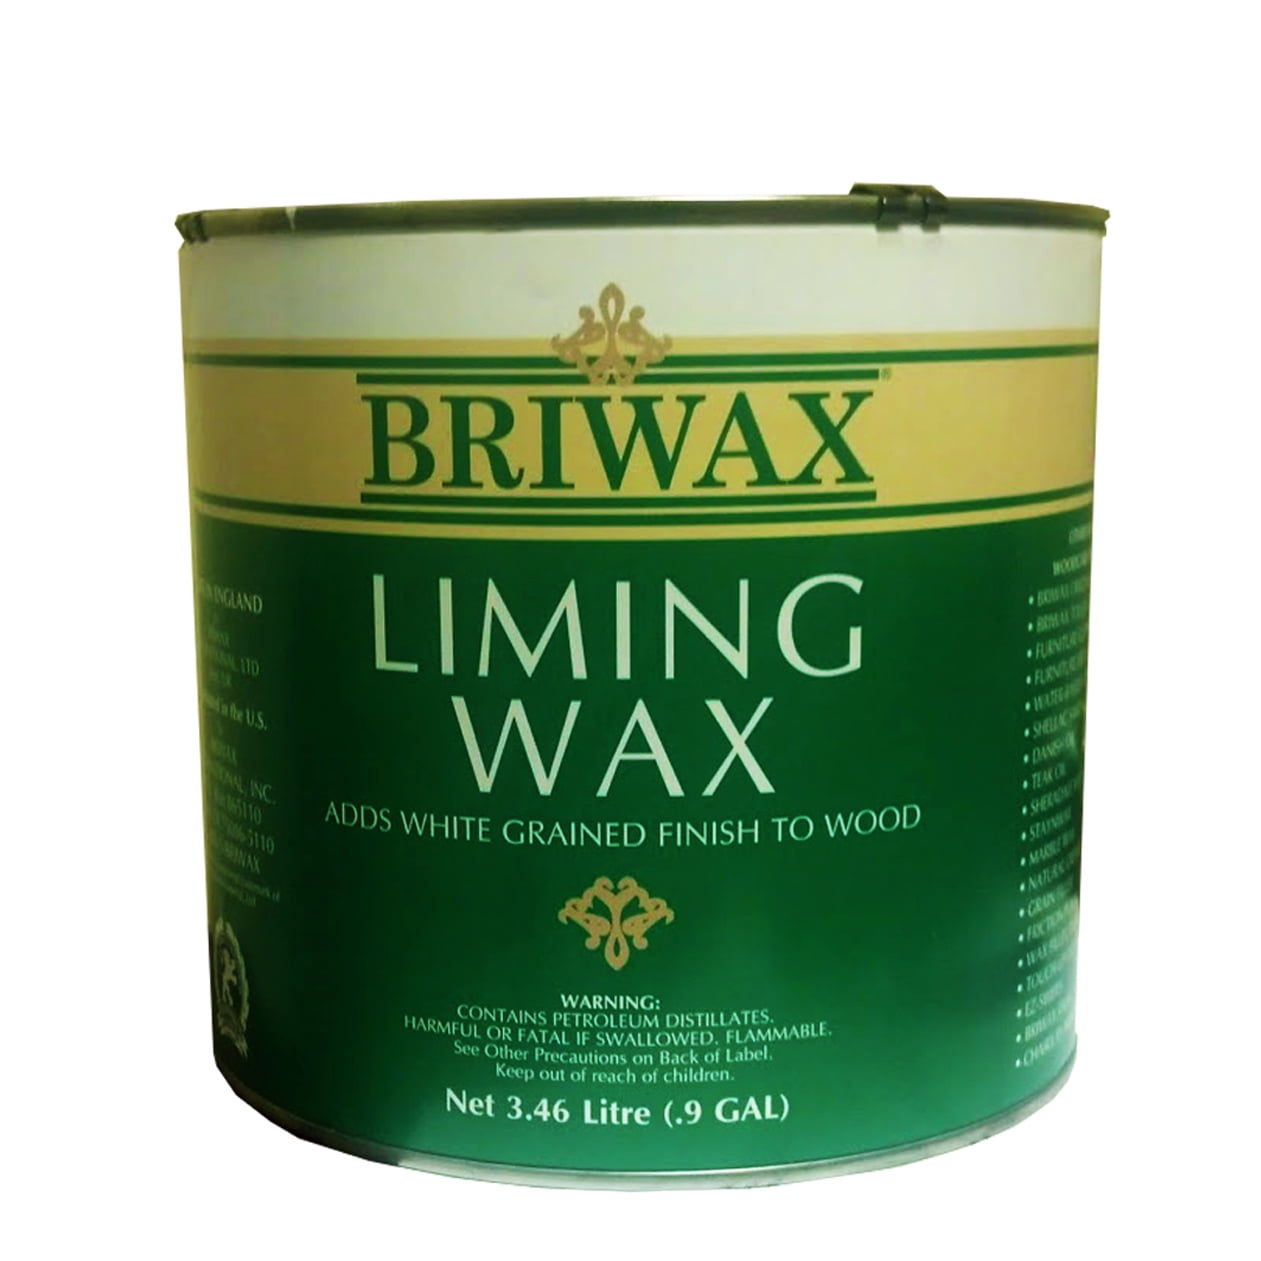 Minwax - Paste Finishing Wax: Buy Online at Best Price in Egypt - Souq is  now